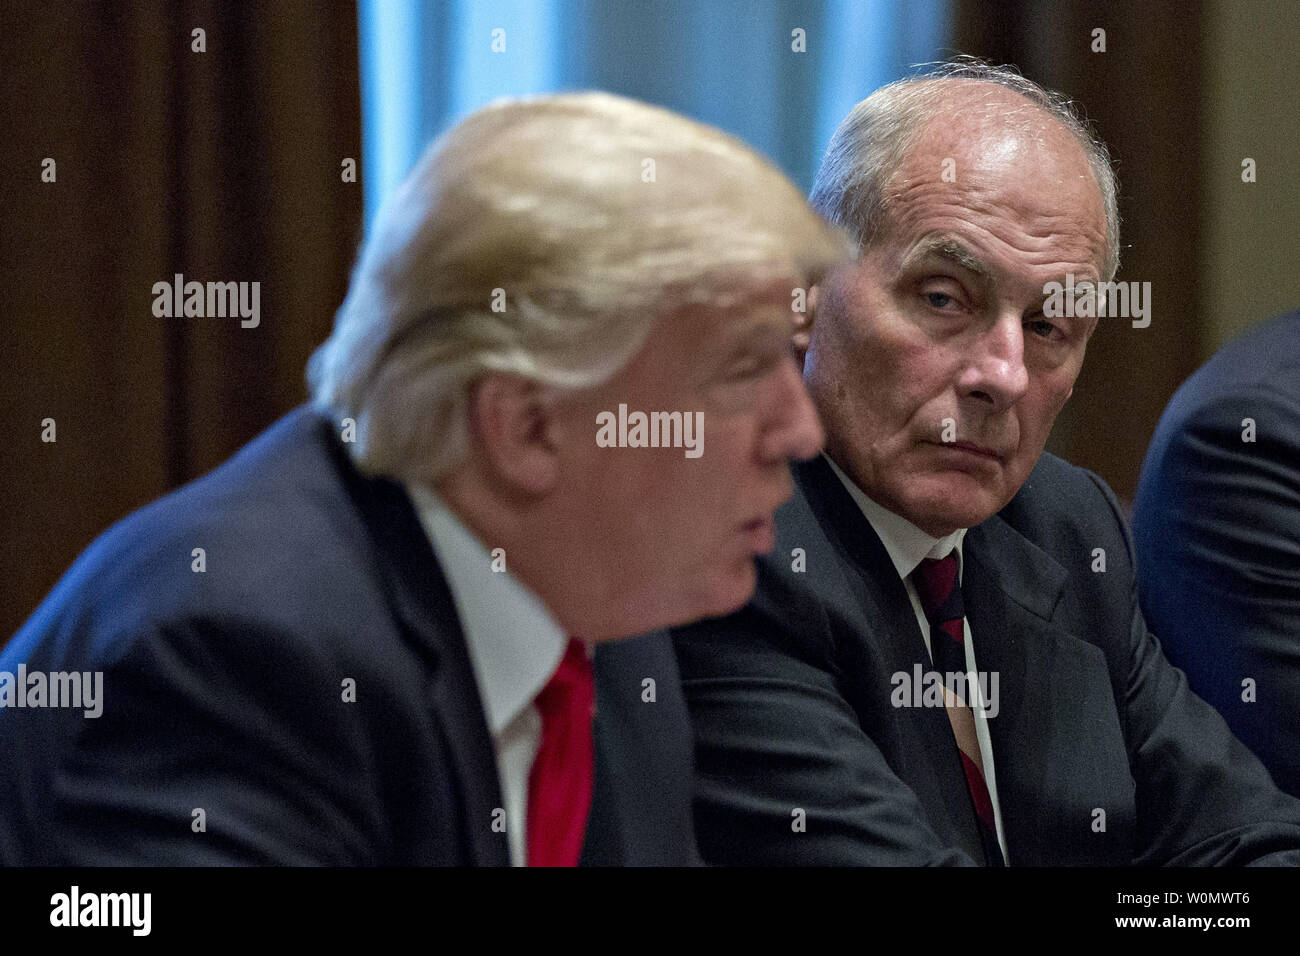 John Kelly, White House chief of staff, listens as U.S. President Donald Trump, left, speaks during a briefing with senior military leaders in the Cabinet Room of the White House in Washington, D.C. on October 5, 2017. Defense Secretary Jim Mattis said this week the U.S. and allies are 'holding the line' against the Taliban in Afghanistan as forecasts of a significant offensive by the militants 'remain unfulfilled'.     Photo by Andrew Harrer/UPI Stock Photo